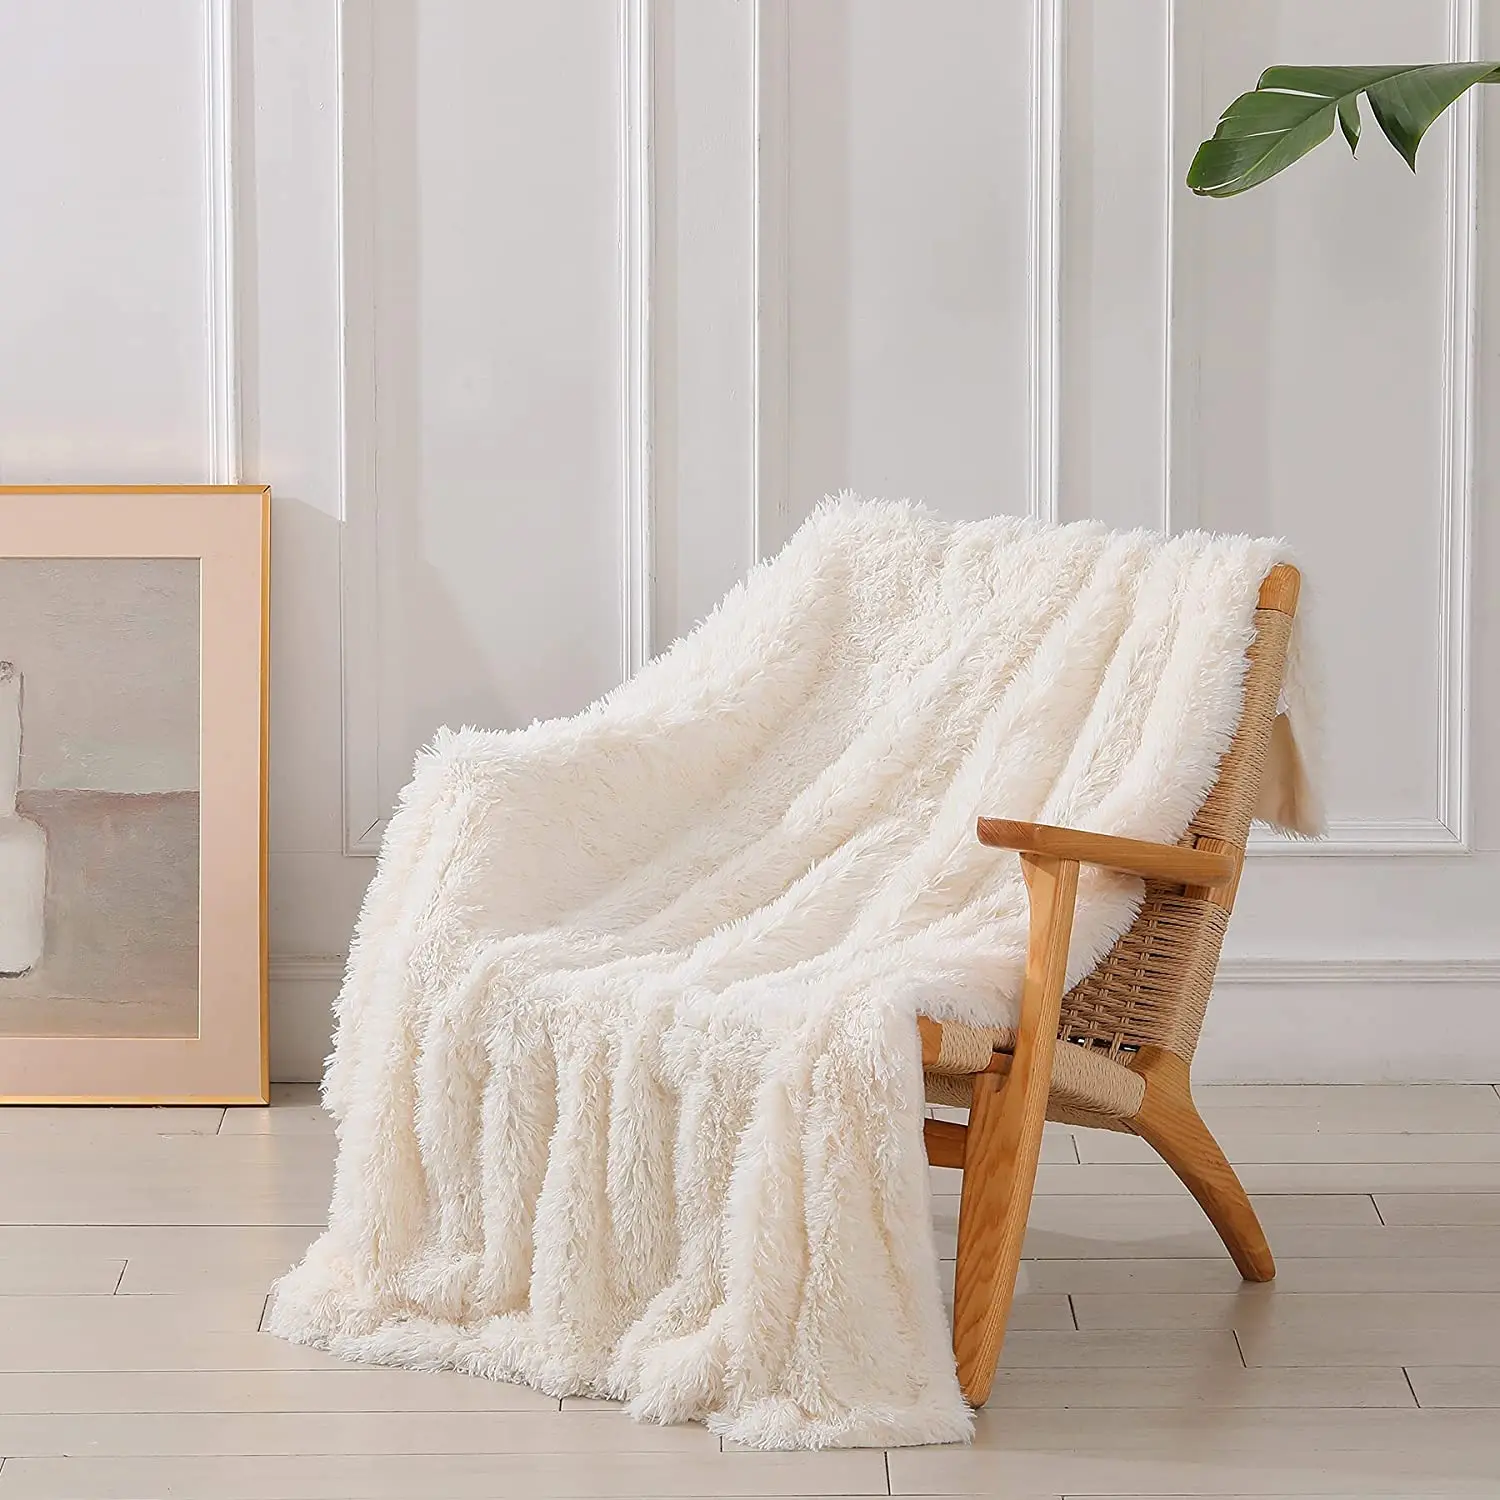 

Cream White Long Shaggy Throw Blanket Fluffy Cozy Plush Comfy Microfiber Fleece Blankets for Couch Sofa Bedroom130*160